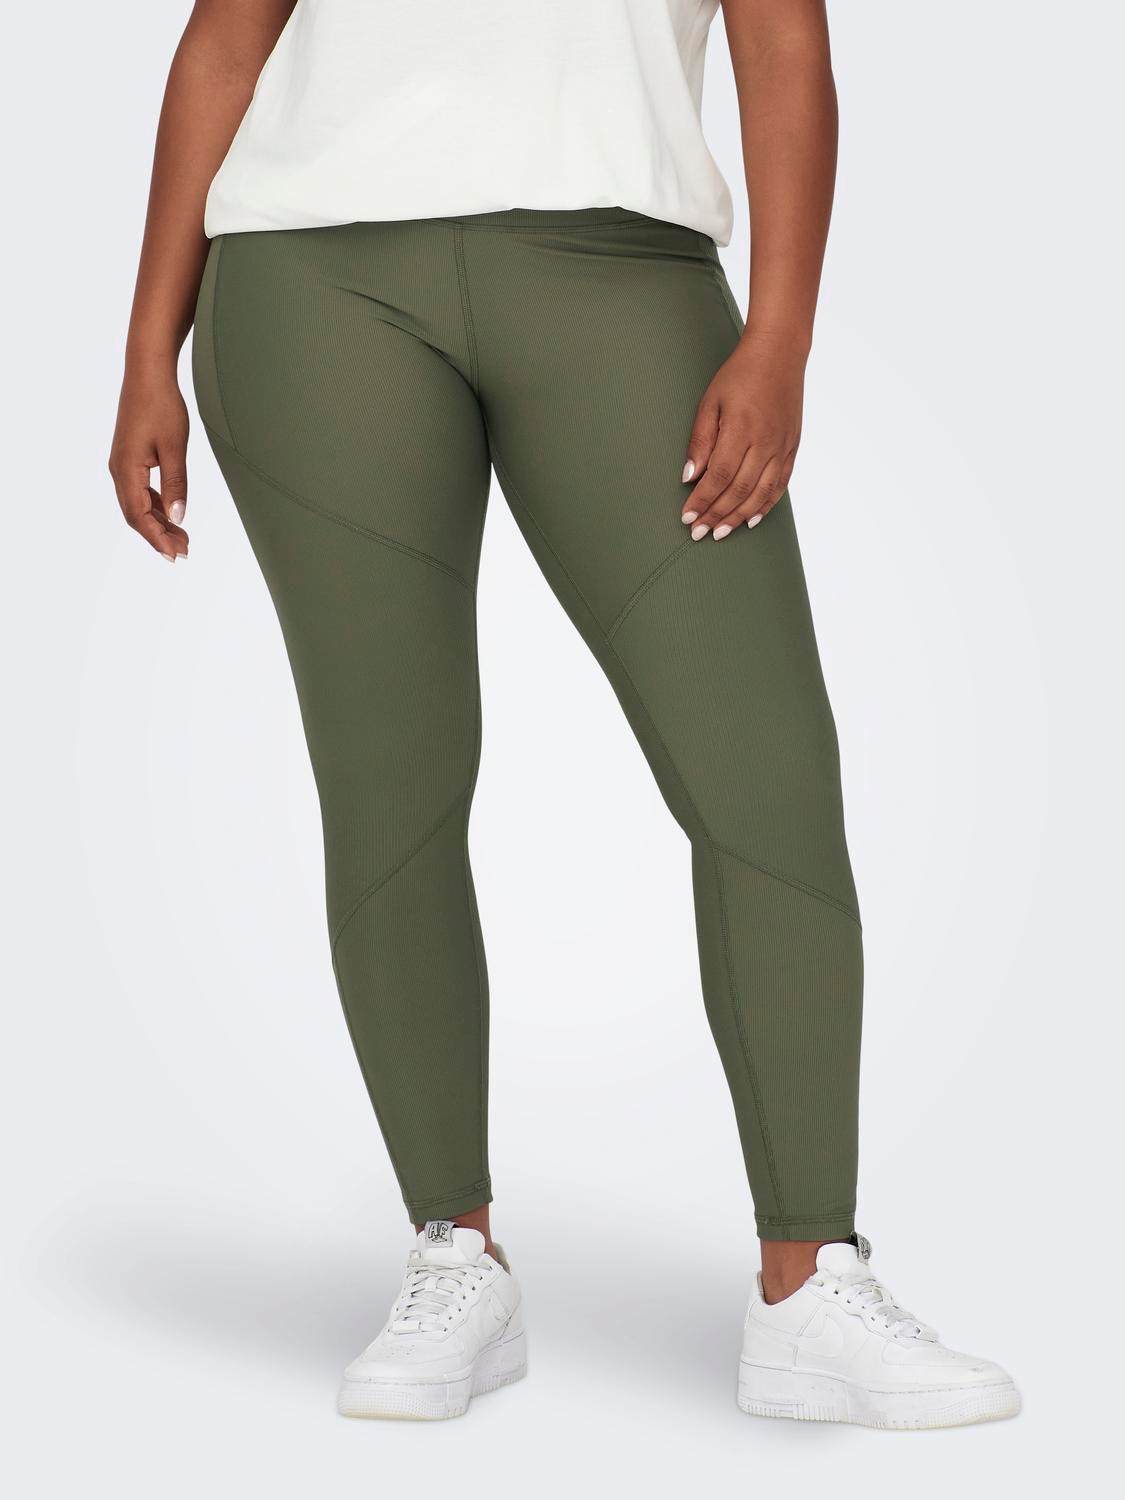 ONLY Tight Fit Høy midje Curve Leggings -Dusty Olive - 15276824